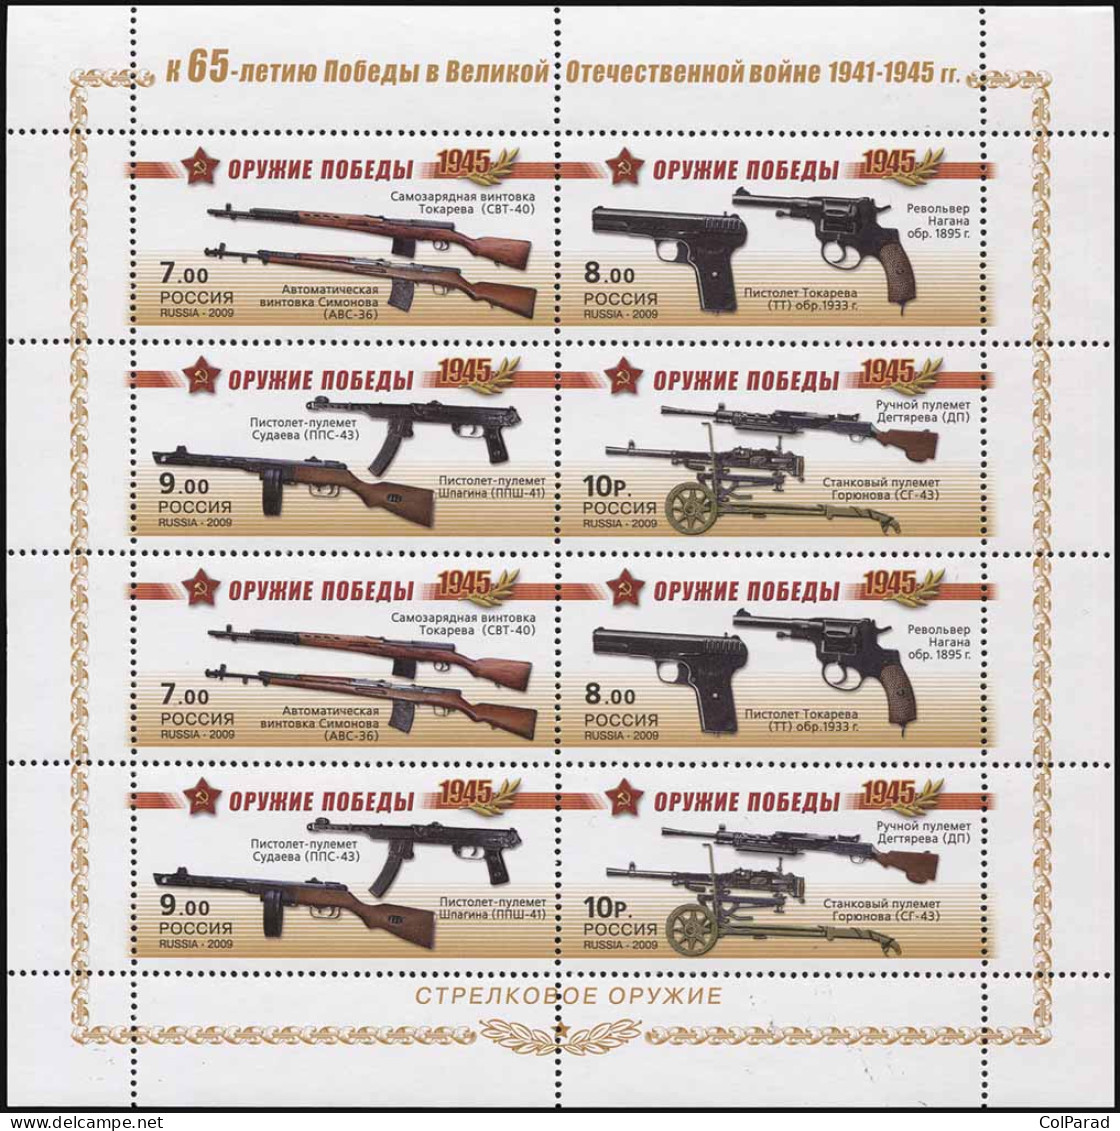 RUSSIA - 2009 - MINIATURE SHEET MNH ** - Victory Weapons. Small Arms - Neufs